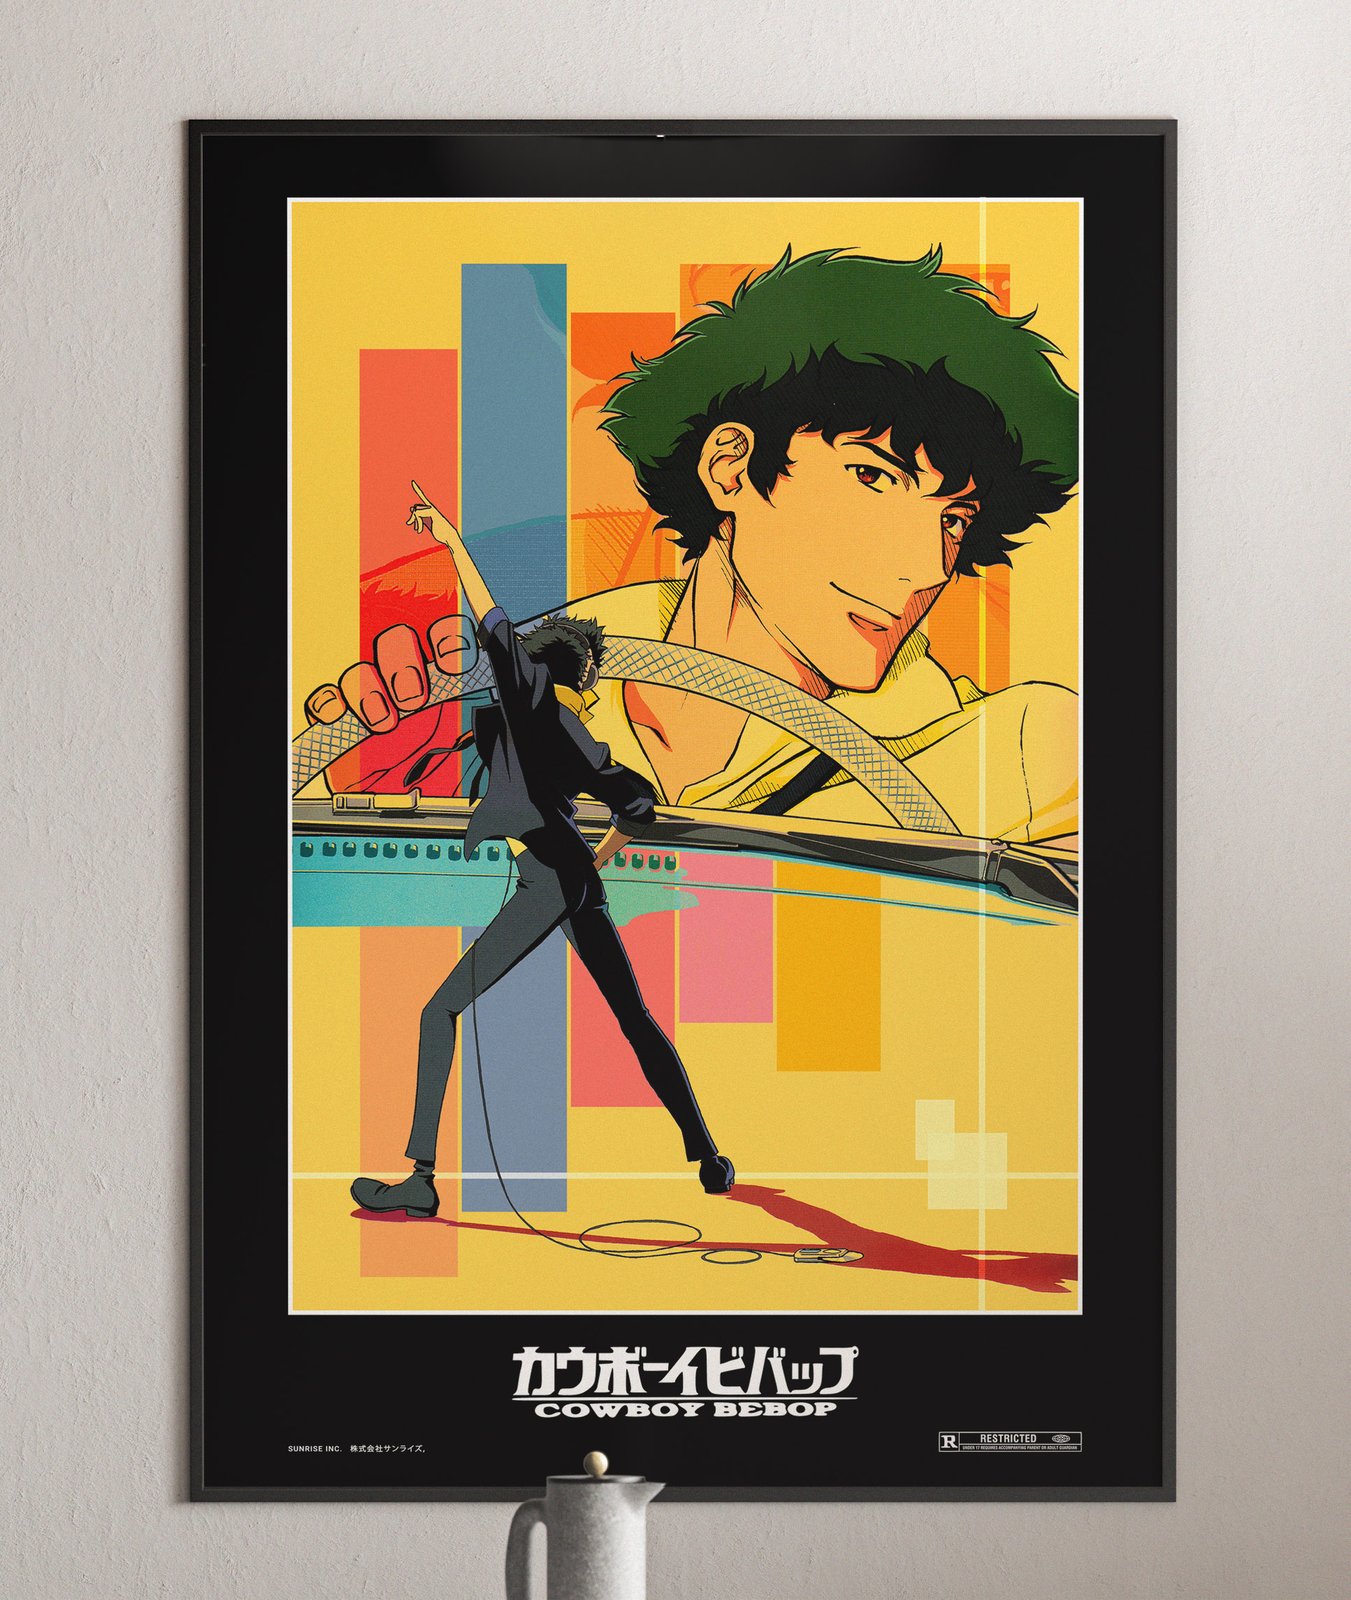 Cowboy Bebop: How Spike Spiegel Changed From Anime To Live-Action